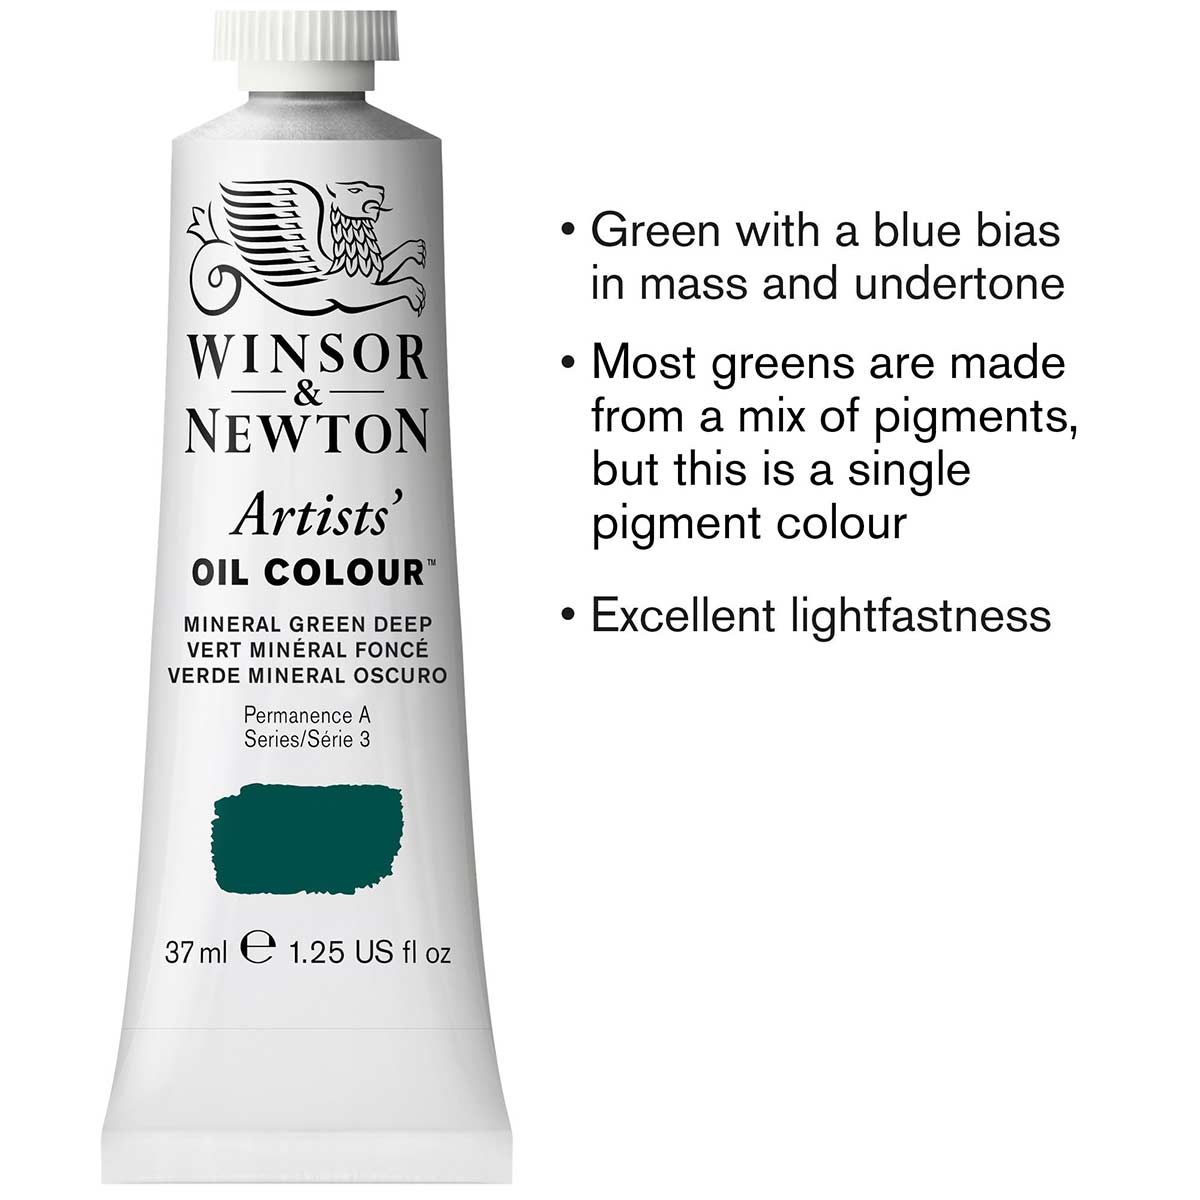 Winsor and Newton - Artists' Oil Colour - 37ml - Mineral Green Deep S3